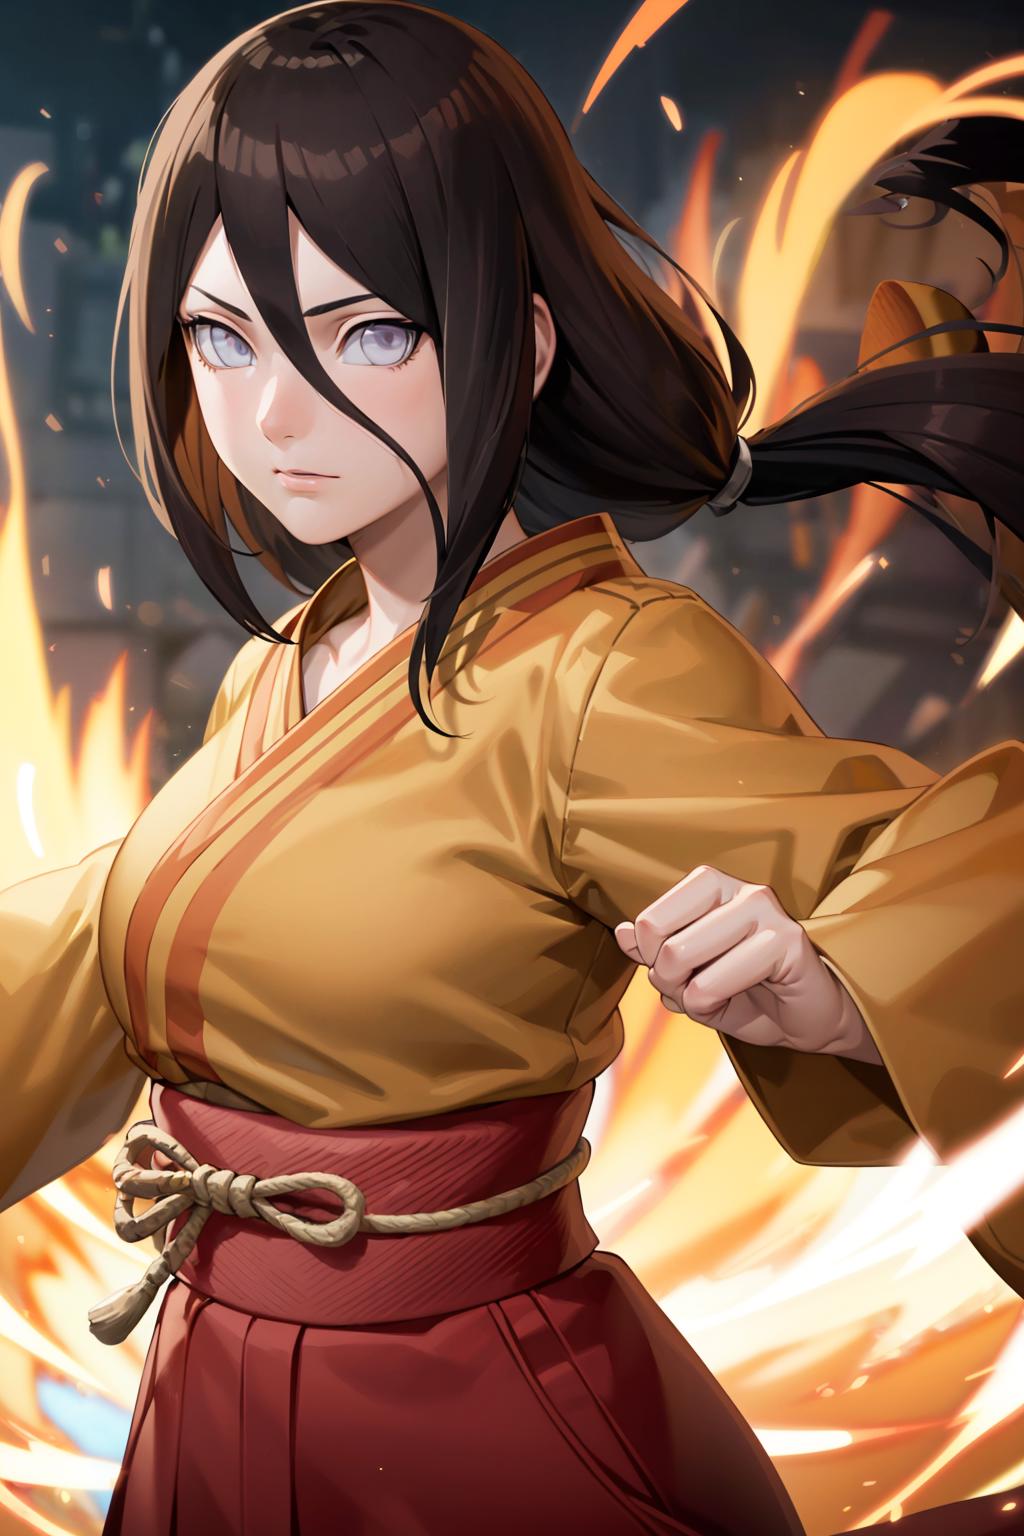 Cartoon illustration of a woman with a yellow kimono and blue eyes standing in front of a fire.